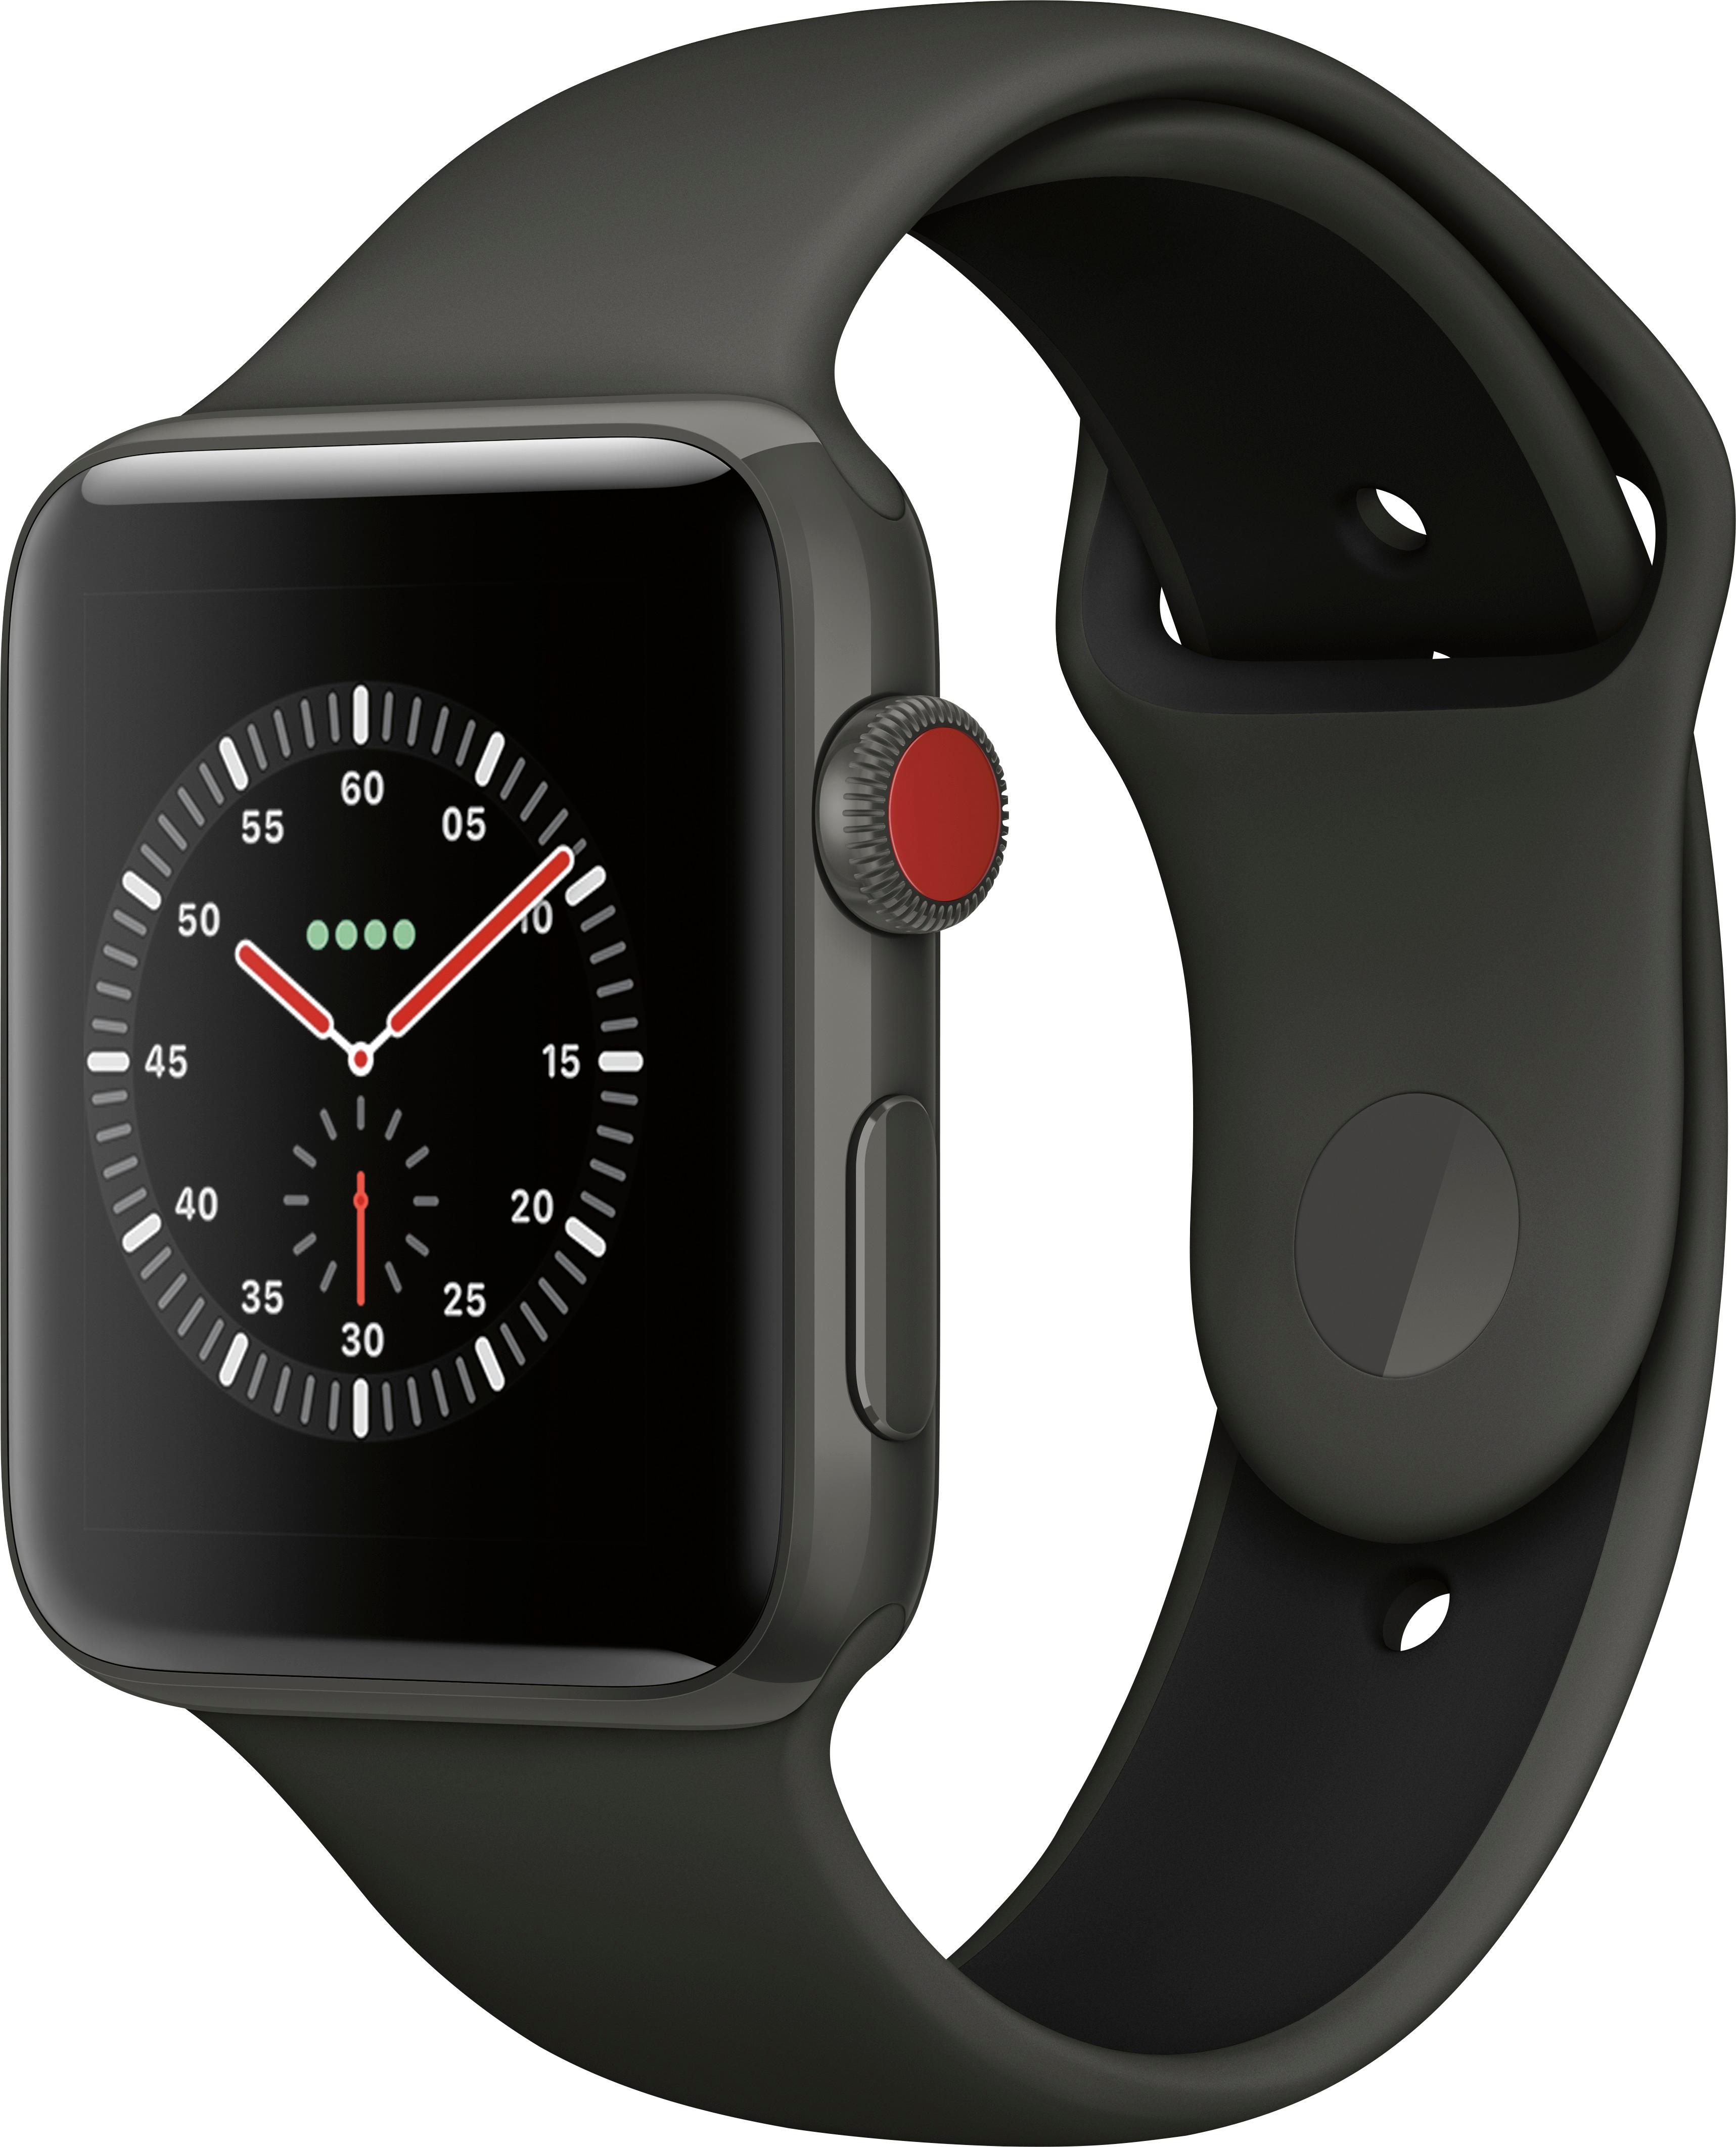 Angle View: Apple Watch Gen 3 Series 3 Cell 42mm Gray Ceramic - Gray/Black Sport Band MQKE2LL/A